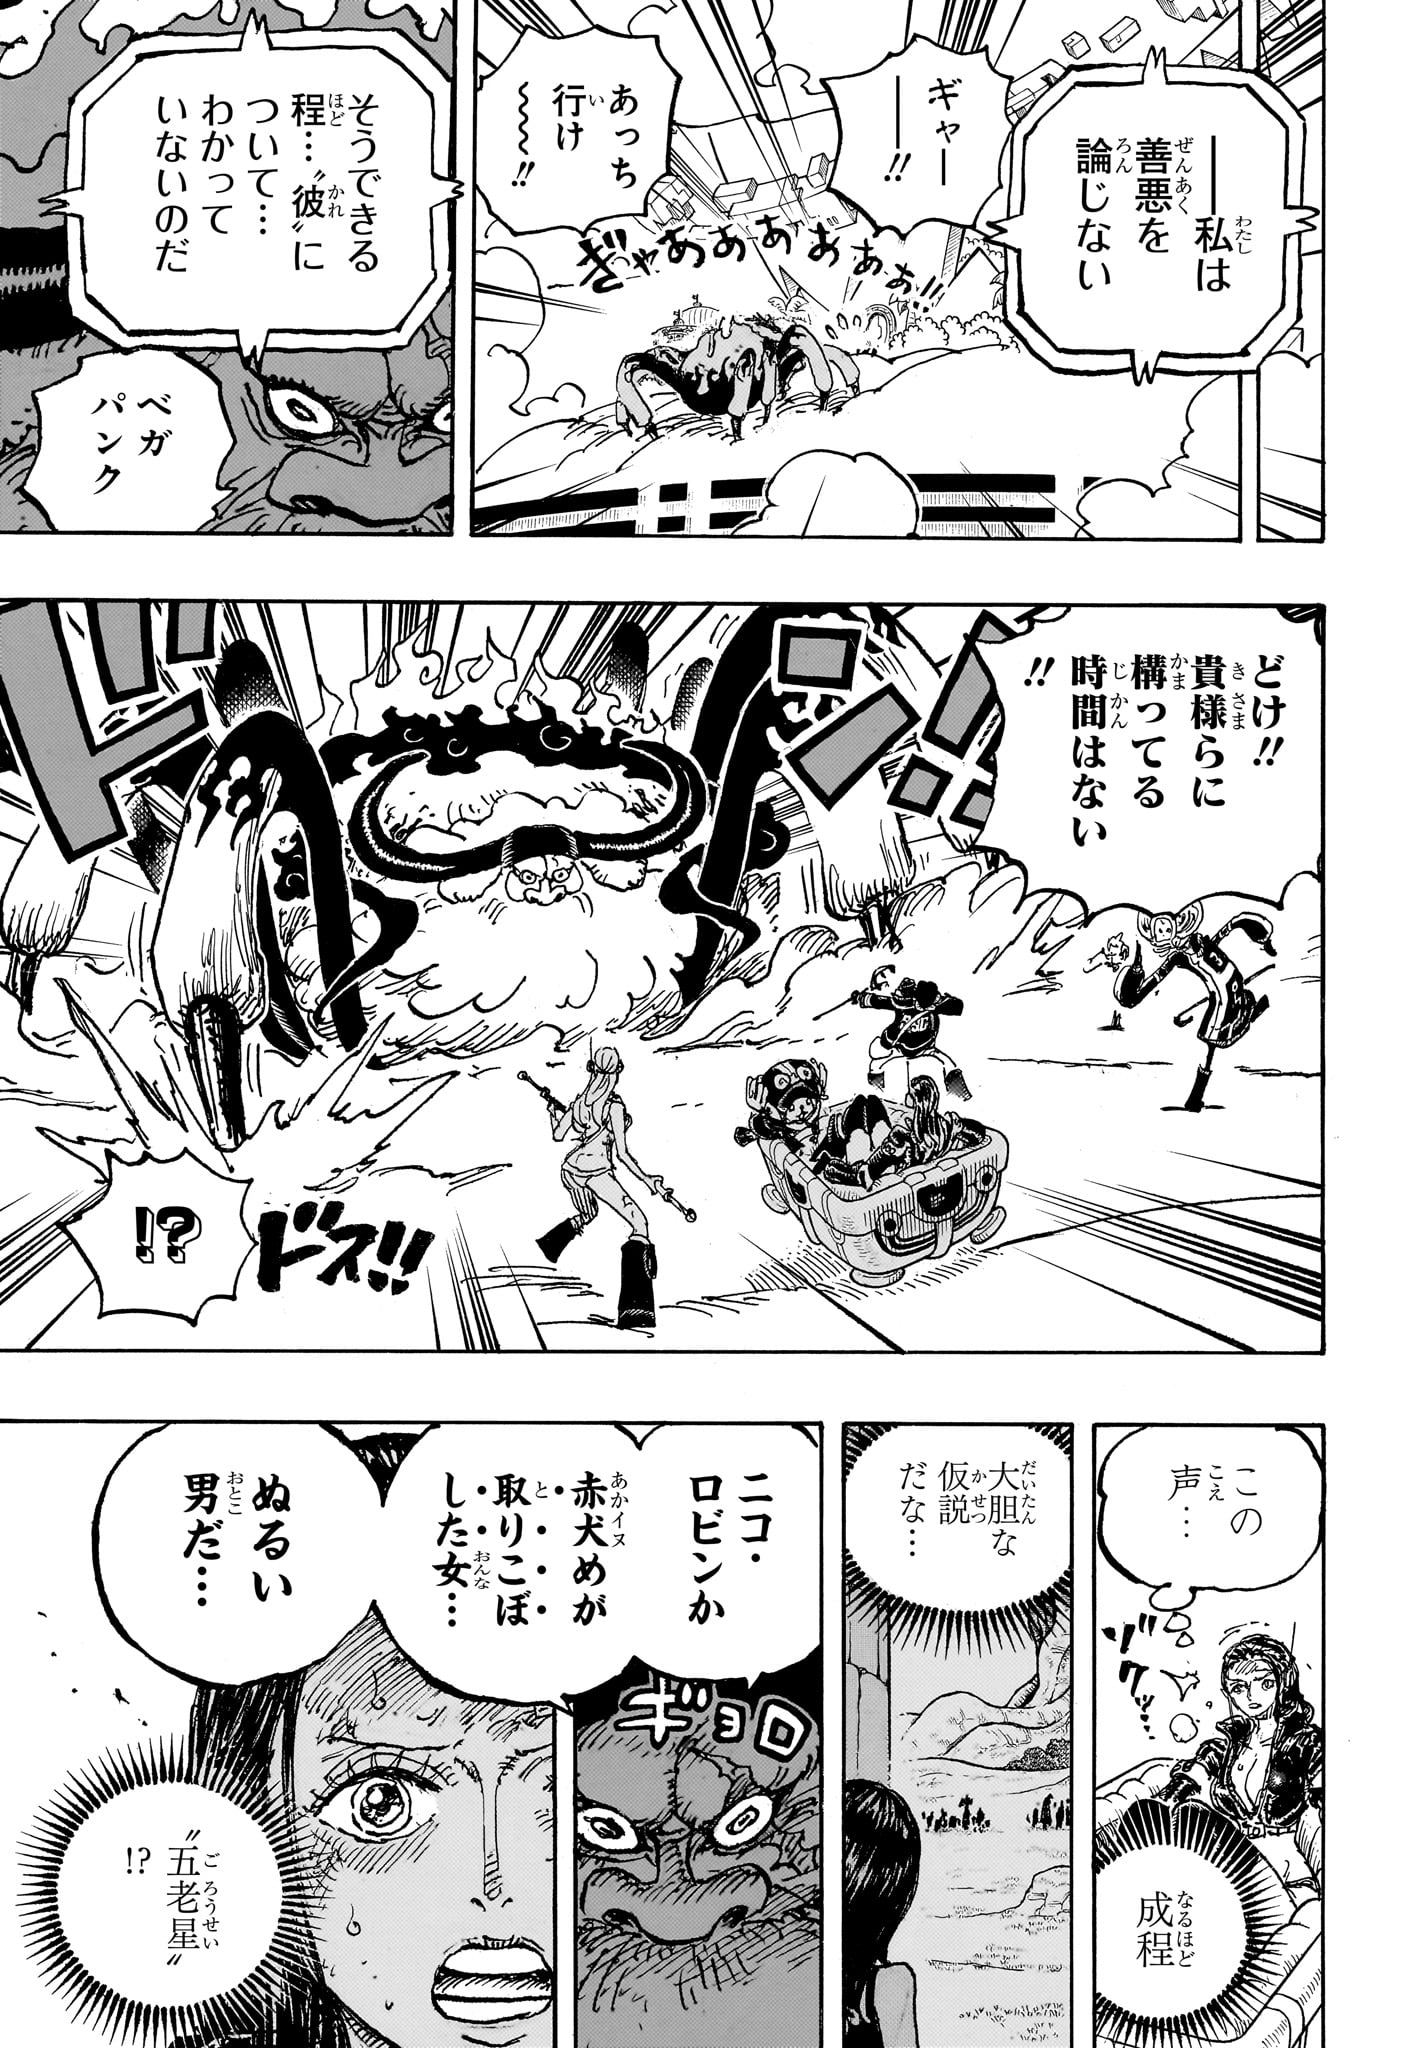 One Piece - Chapter 1113 - Page 15